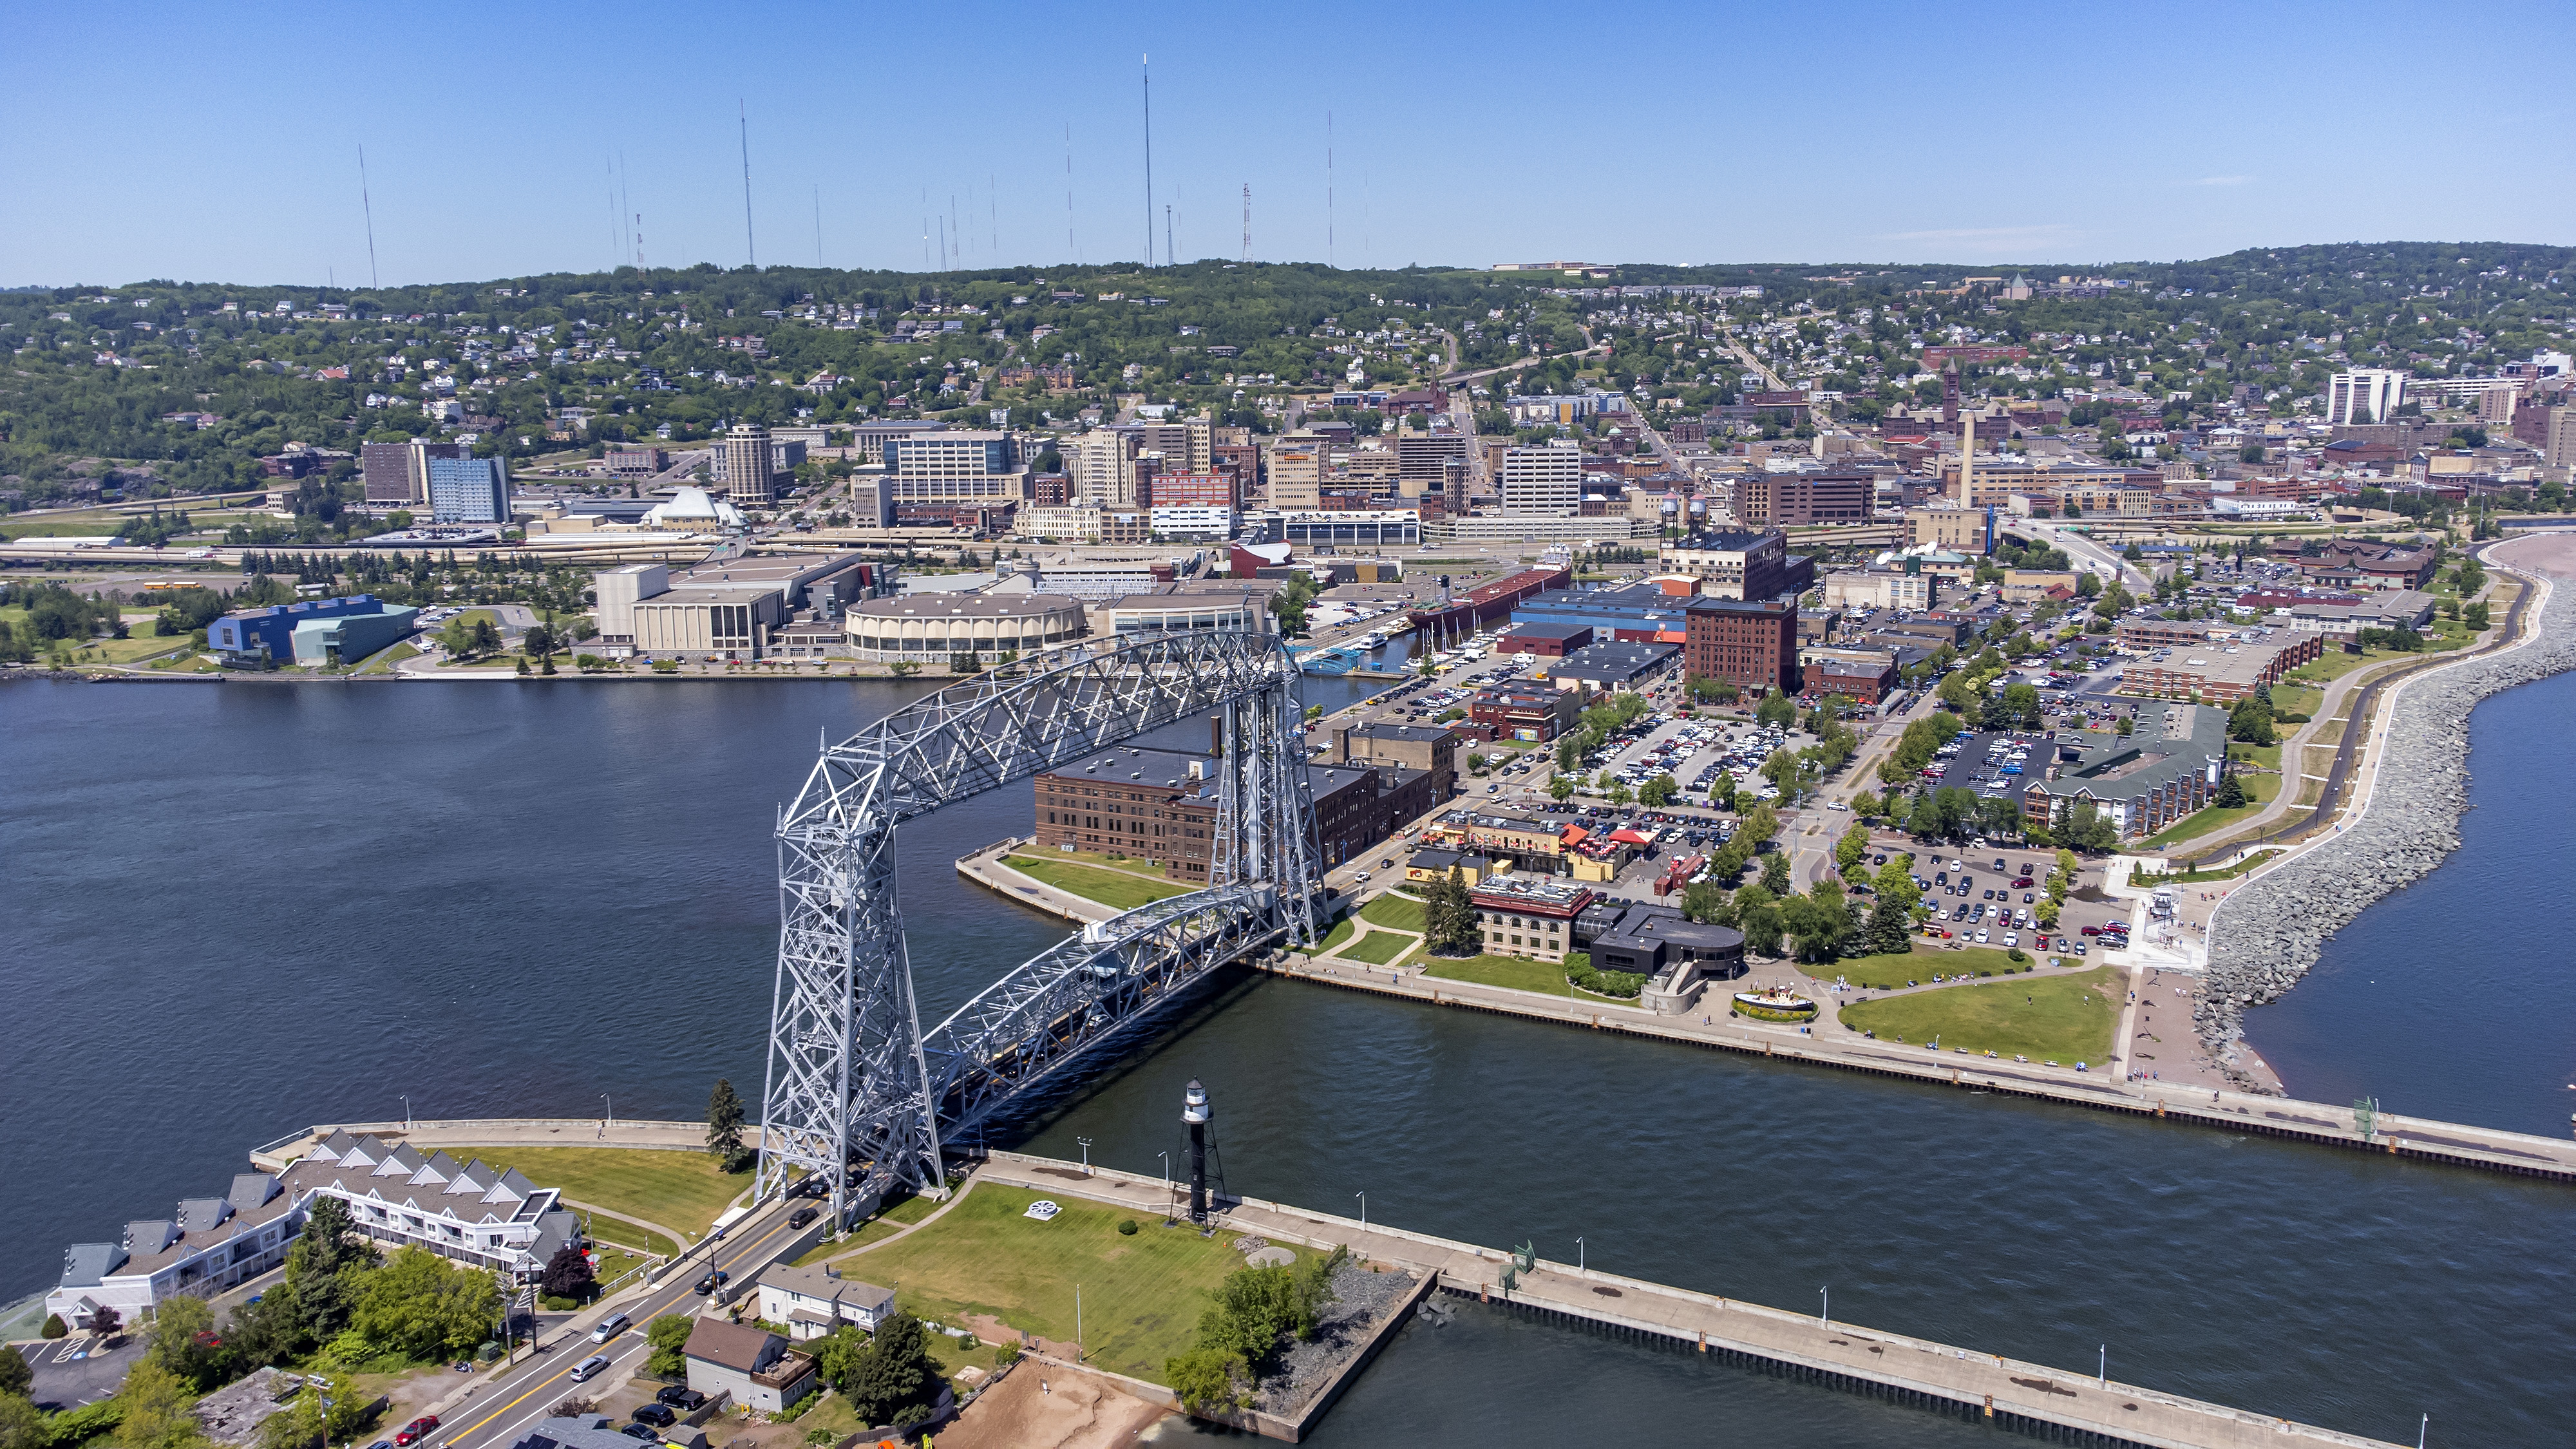 Duluth Drone.jpg. d:Special:EntityPage/P170. d:Special:EntityPage/P180. d:S...